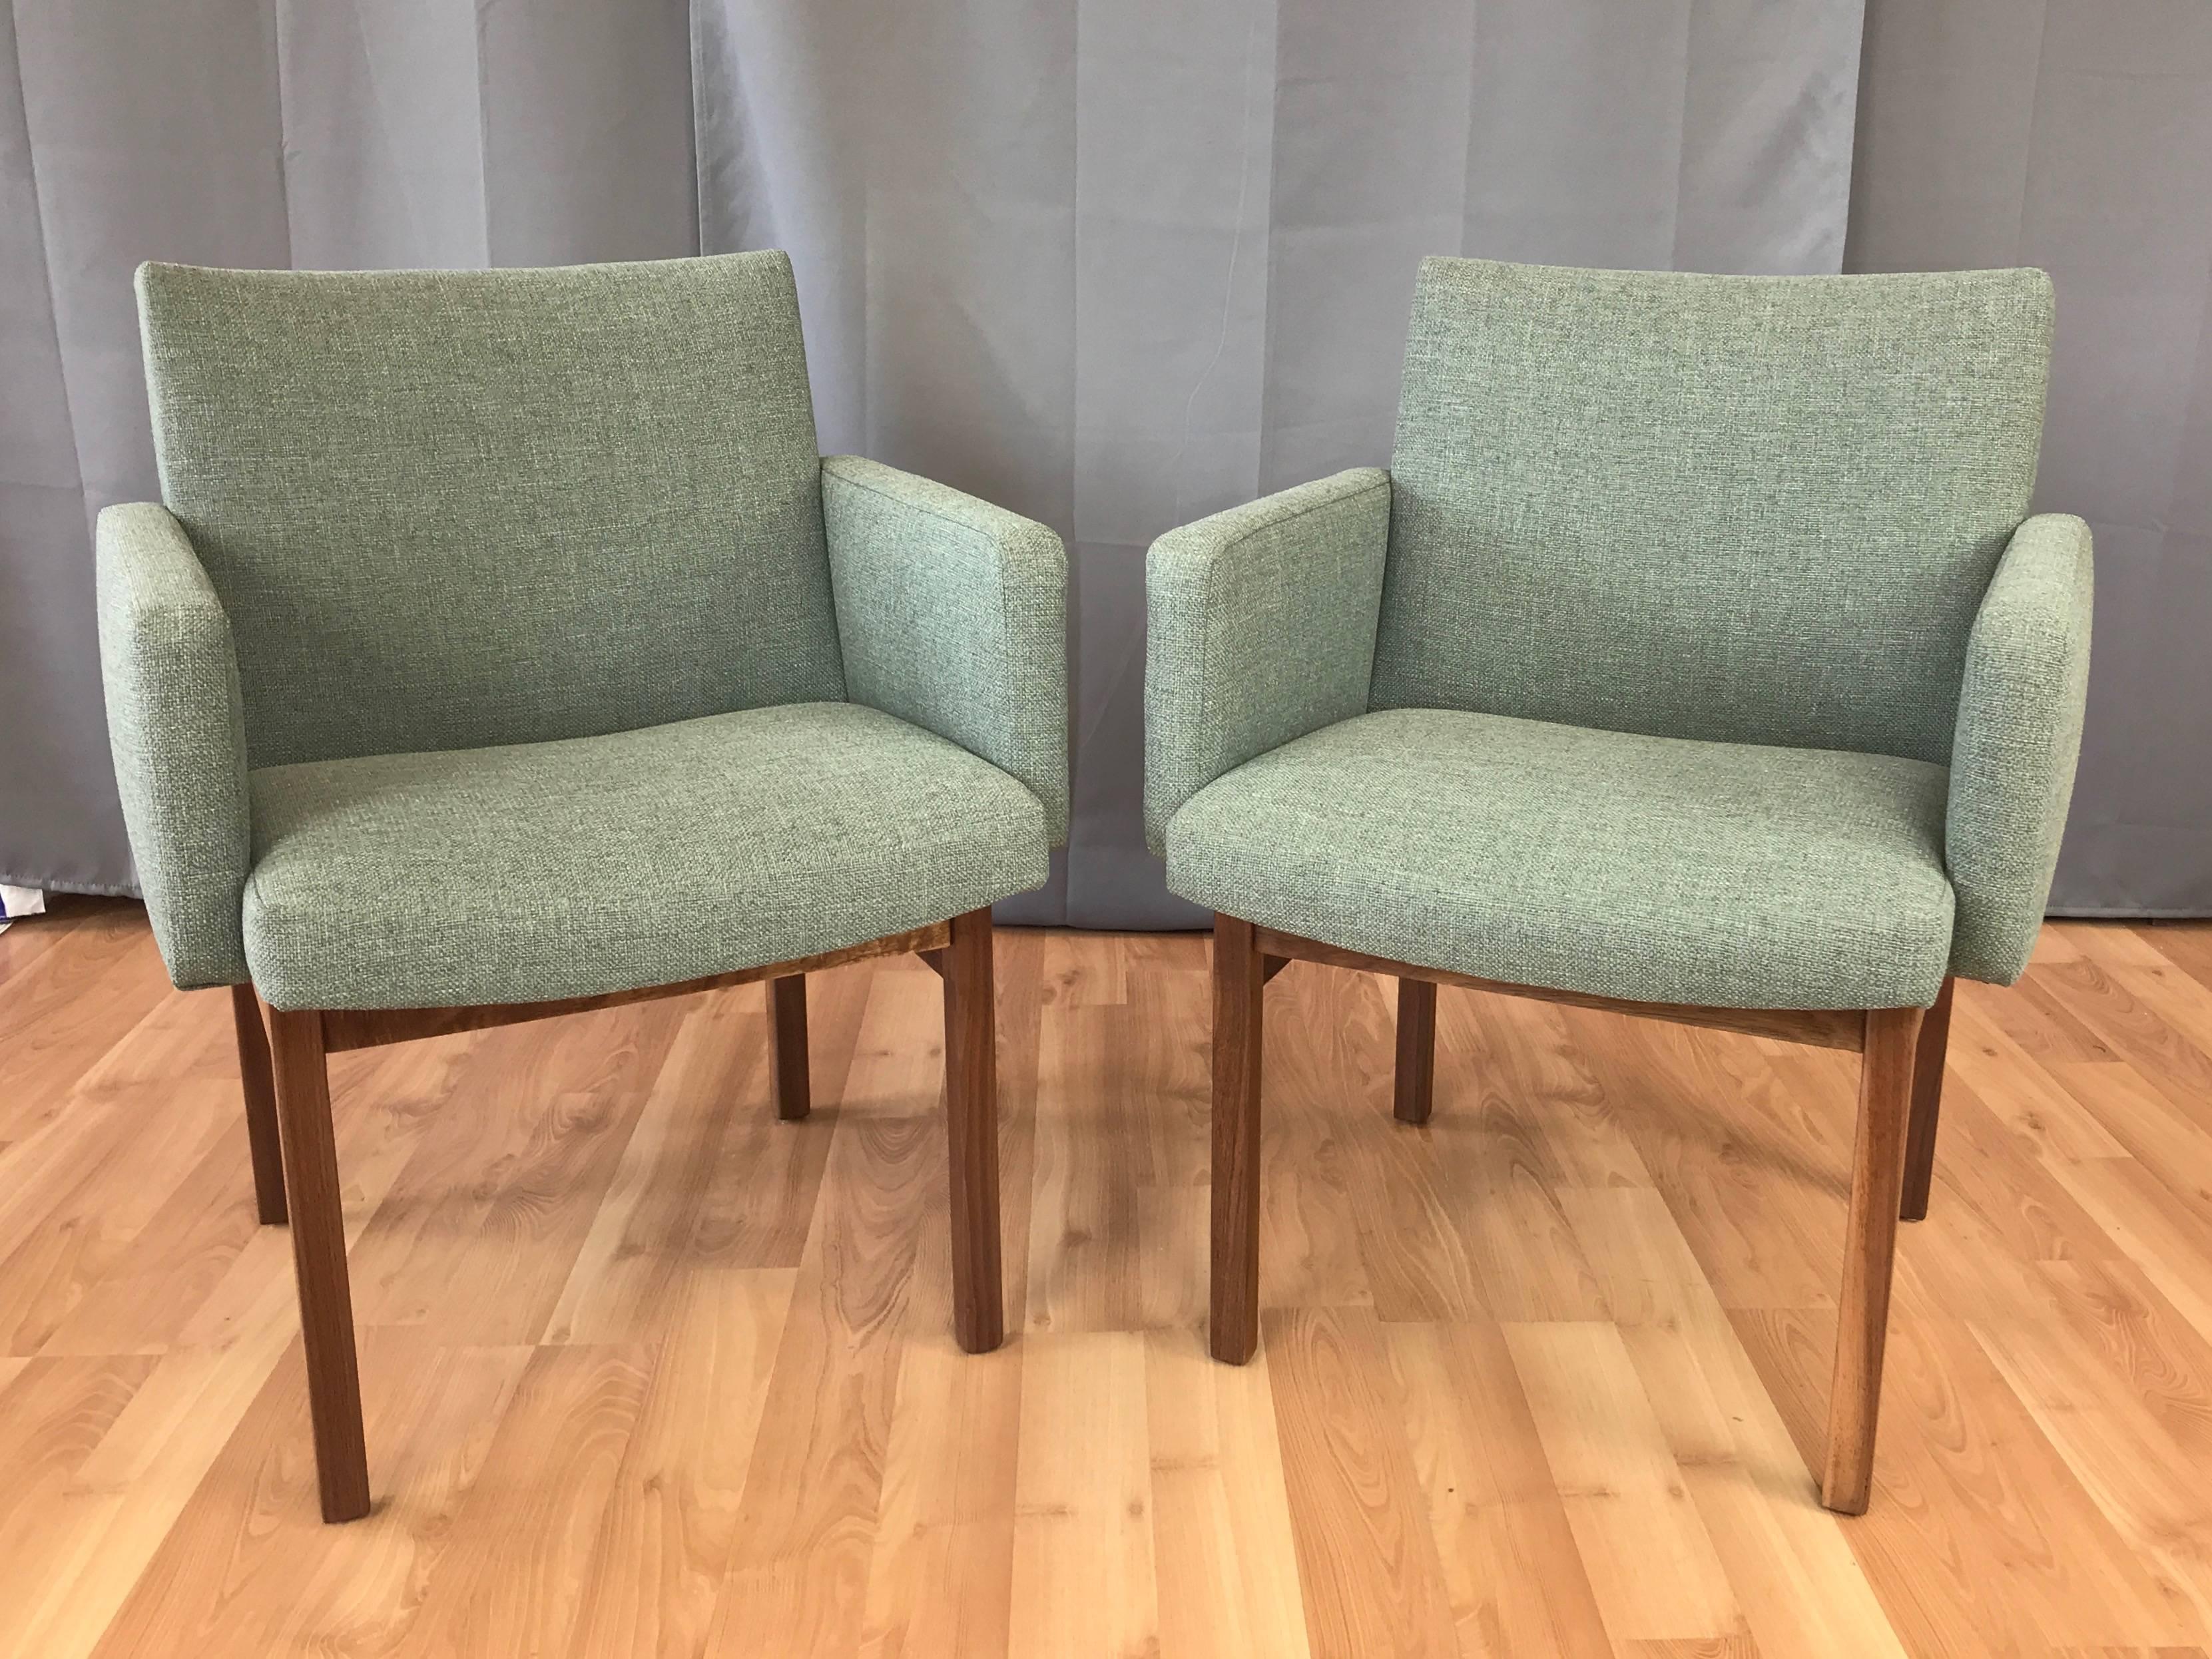 Mid-20th Century Pair of Midcentury Walnut Lounge Chairs Attributed to Jens Risom